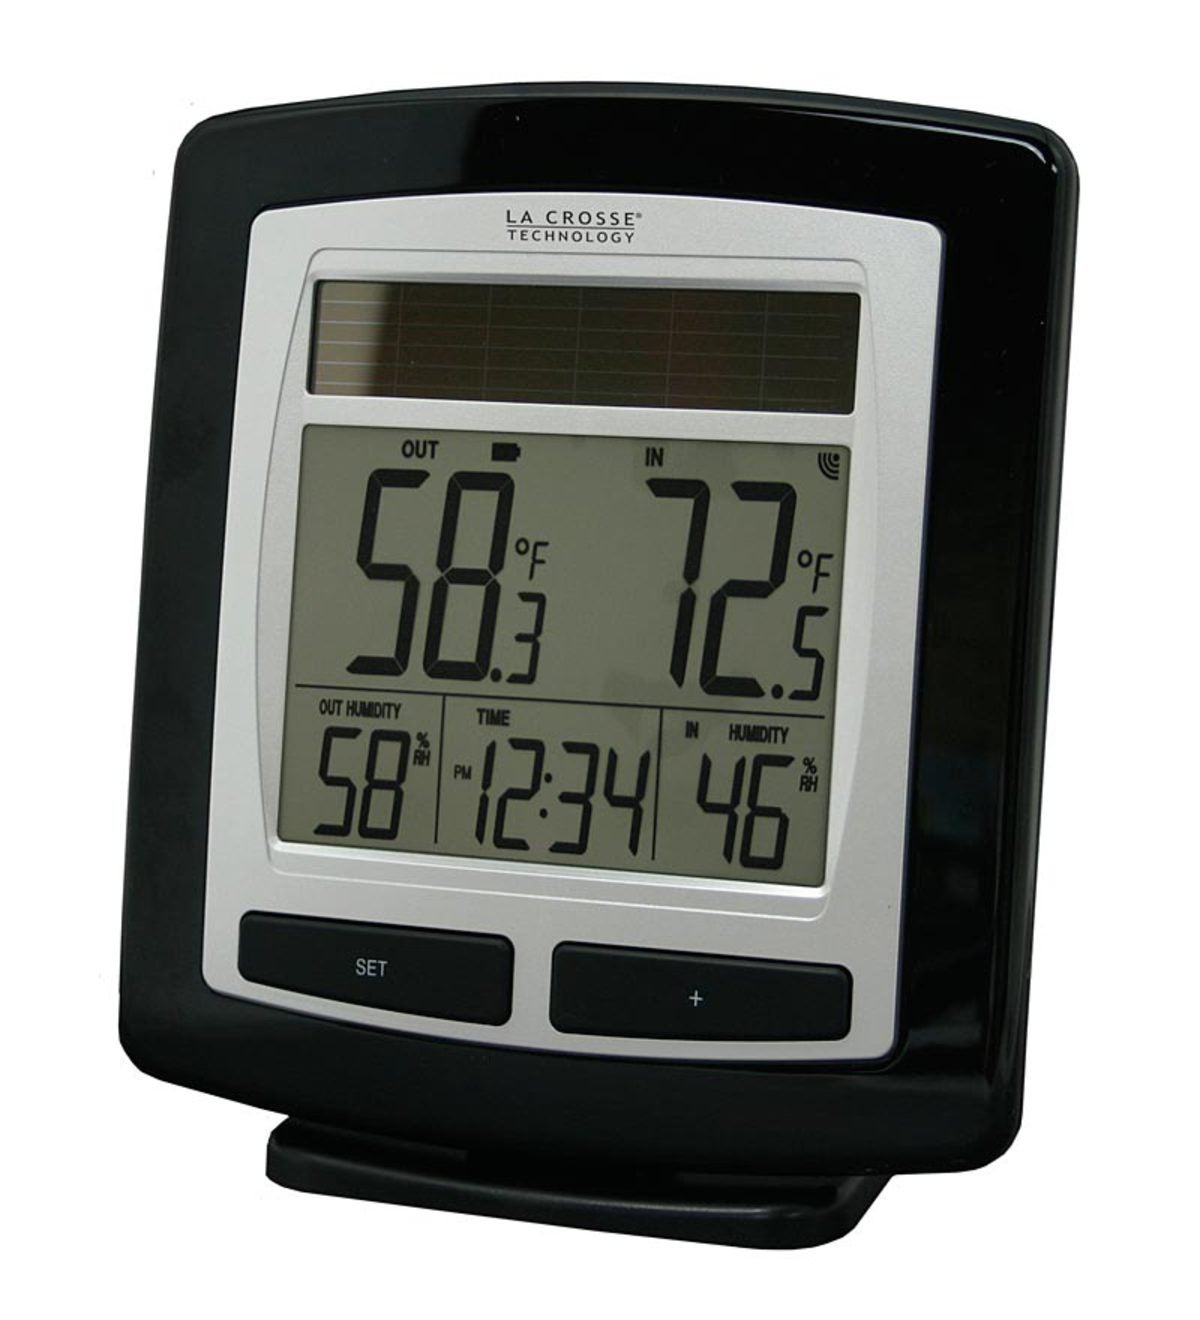 Solar Powered Wireless Humidity/Temperature Station and Sensor by La Crosse Technology